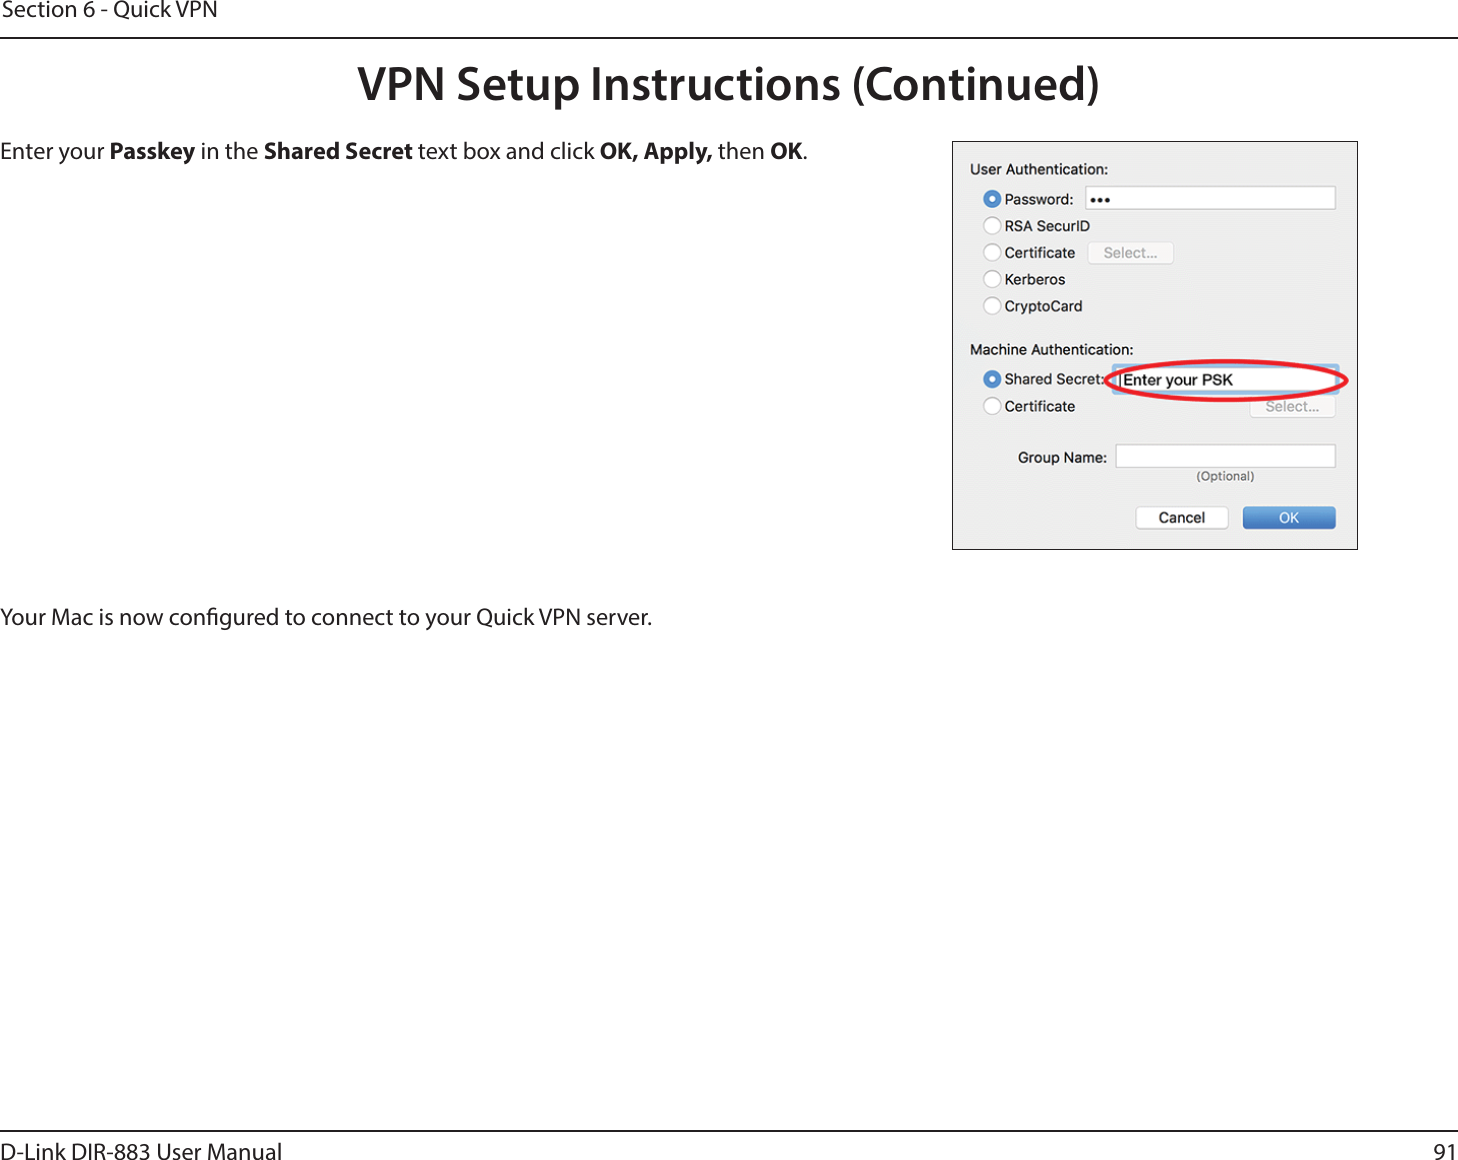 91D-Link DIR-883 User ManualSection 6 - Quick VPNEnter your Passkey in the Shared Secret text box and click OK, Apply, then OK.Your Mac is now congured to connect to your Quick VPN server.VPN Setup Instructions (Continued)